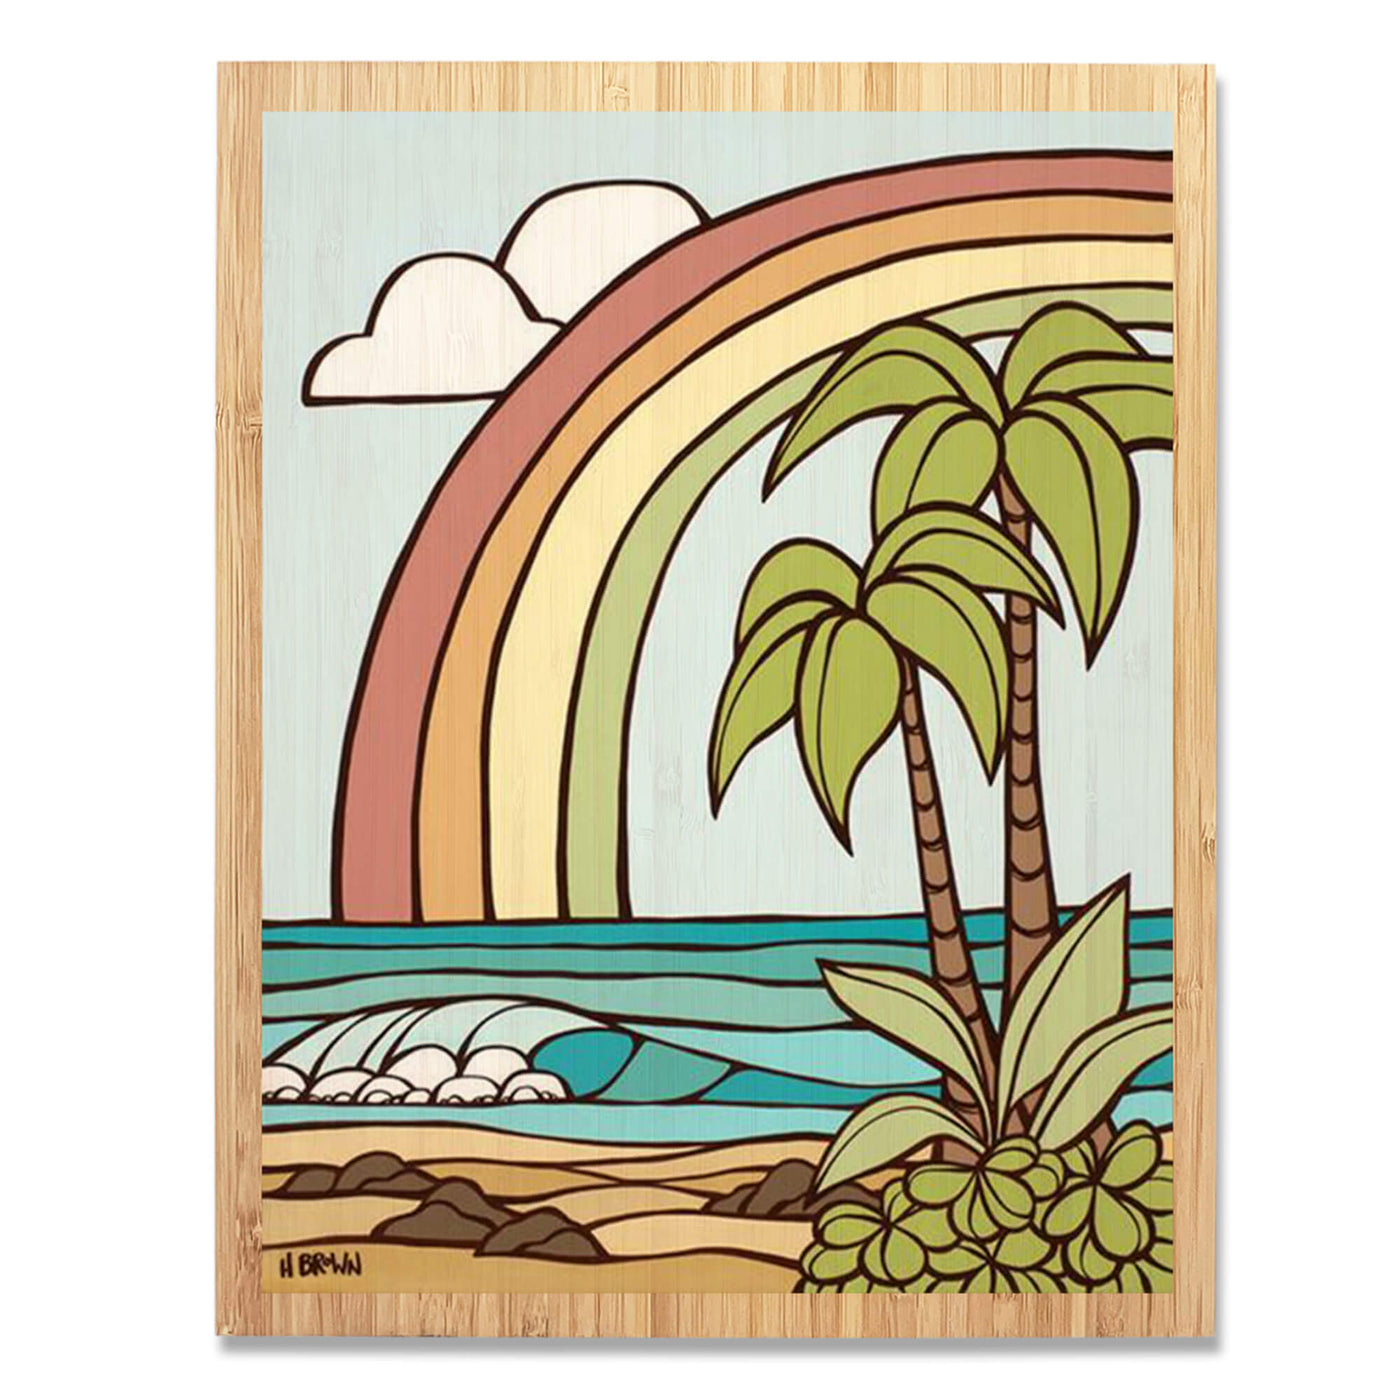 A bamboo art print with border featuring a vibrant colored seascape framed by a rainbow by Hawaii surf artist Heather Brown